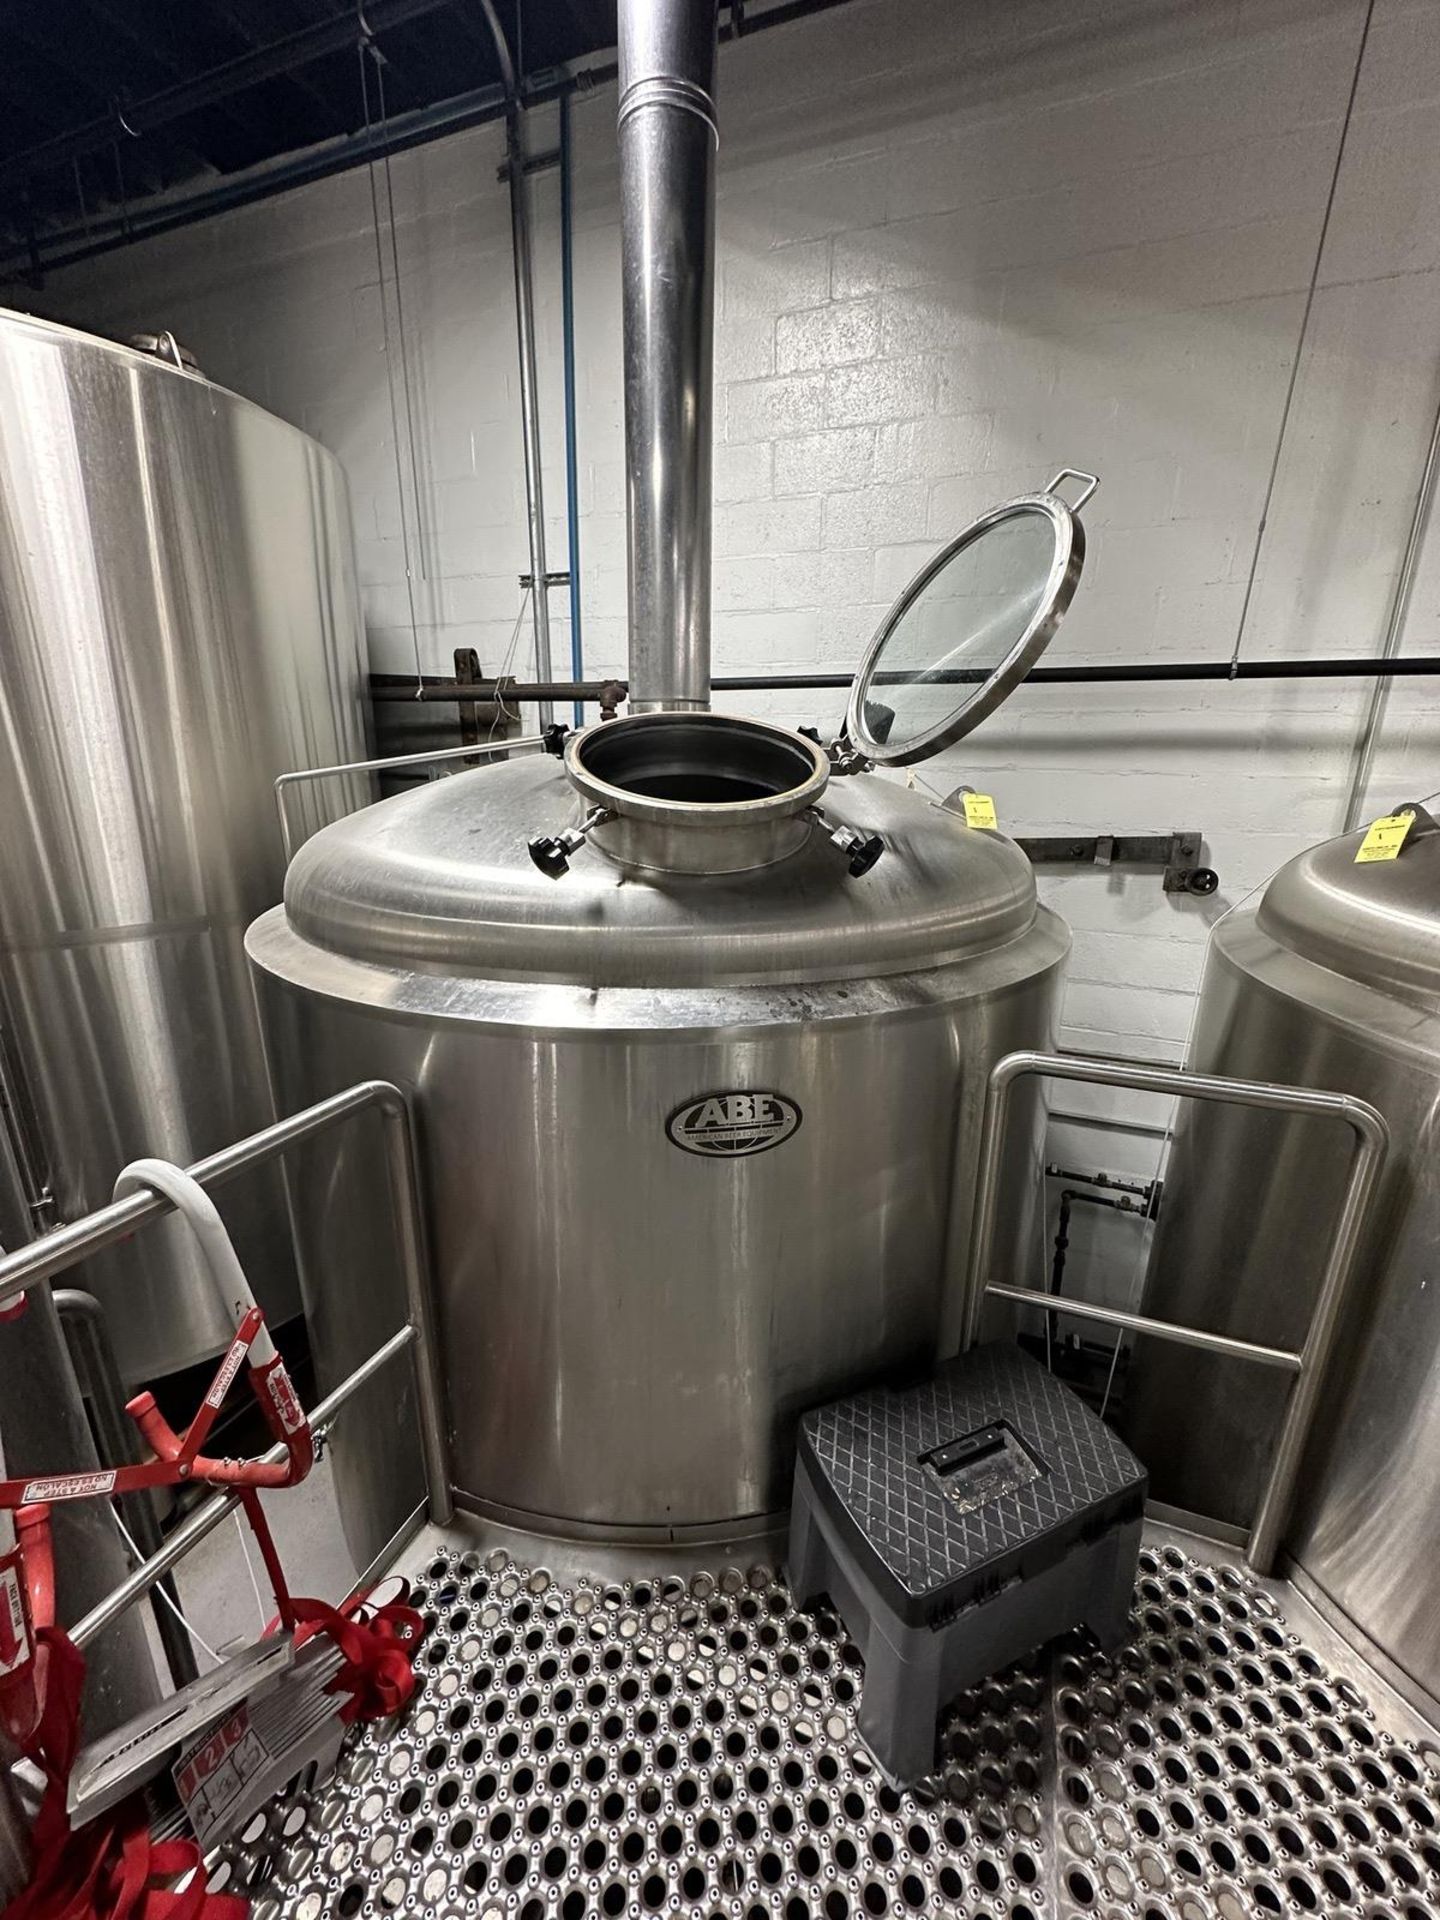 2016 ABE 30 BBL 4-Vessel Brewhouse - Brew Kettle, Mash Tun, Lauter Tun & Whirlpool Including Control - Image 4 of 11